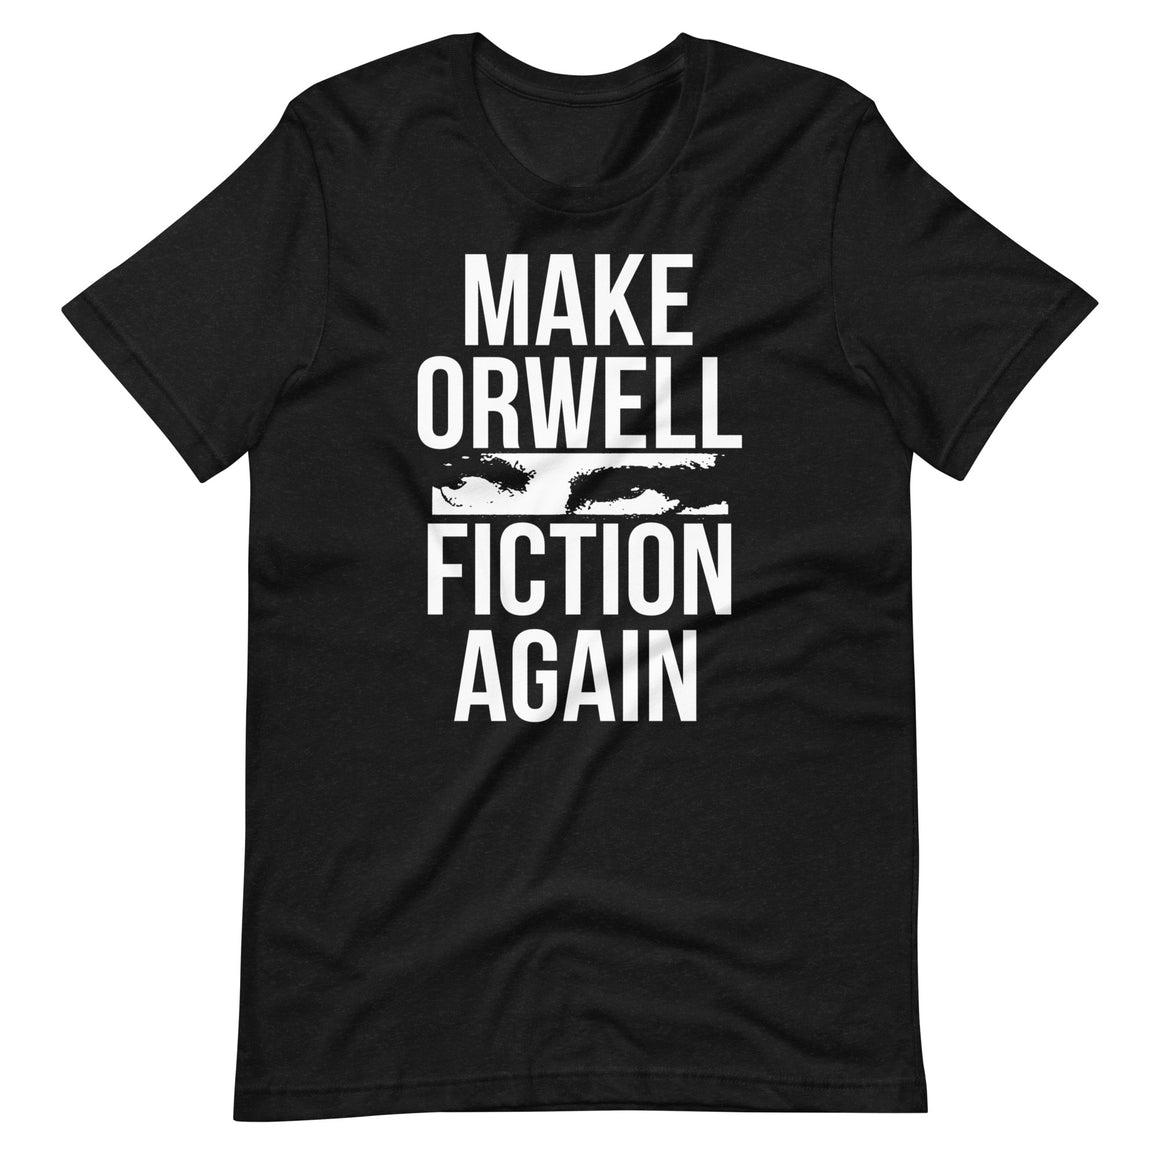 Make Orwell Fiction Again Shirt by Libertarian Country